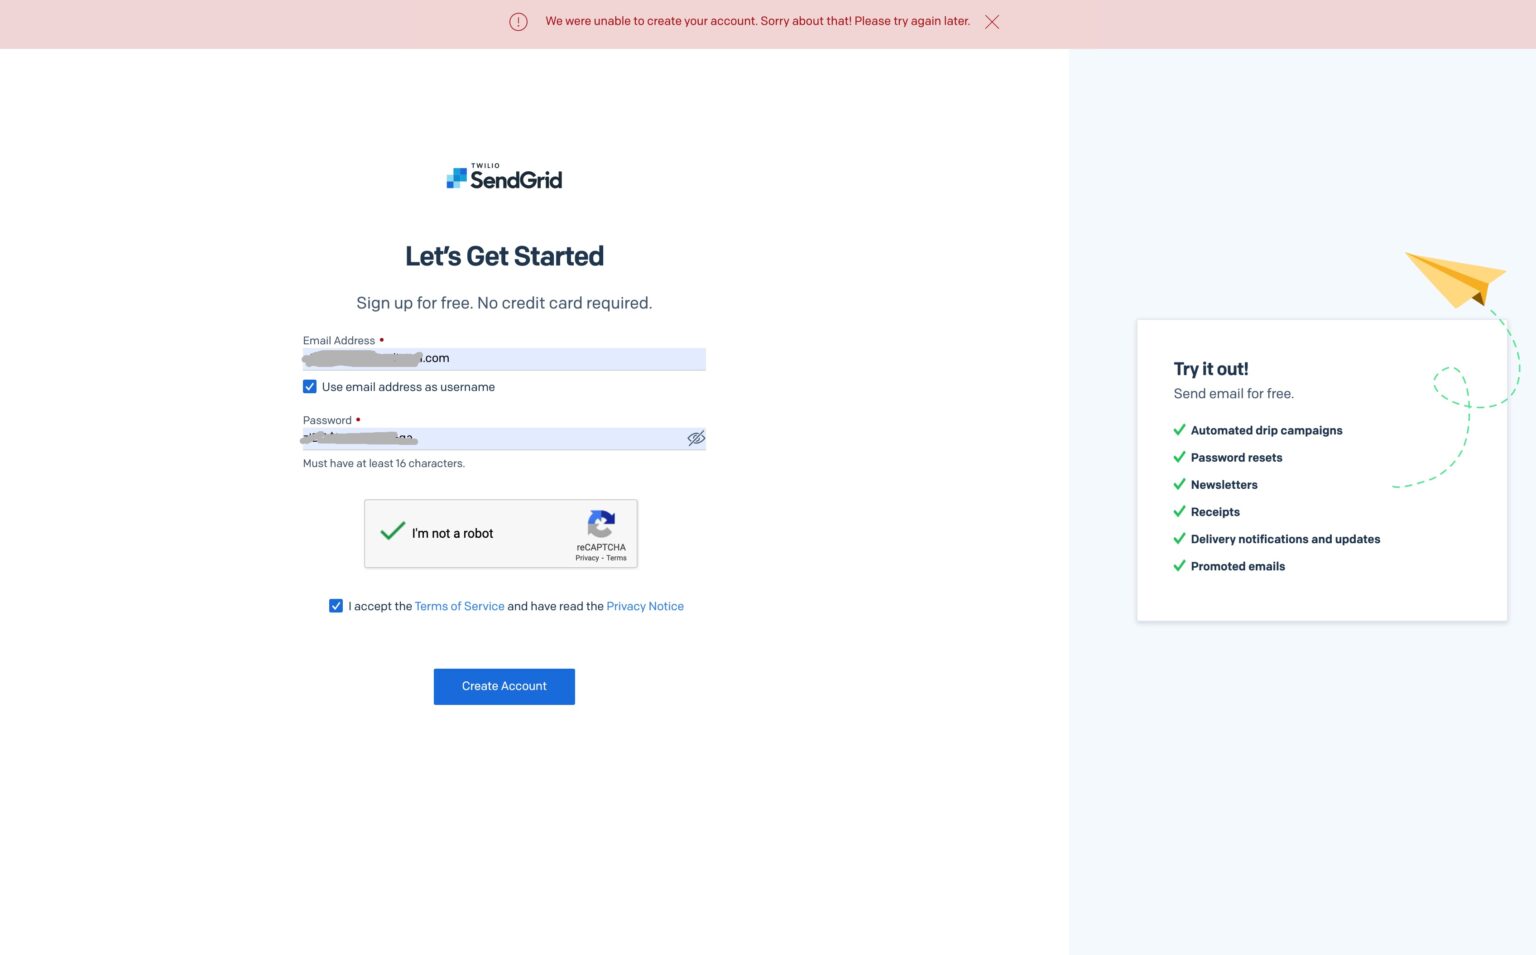 SendGrid Account Creation Error We were unable to create your account